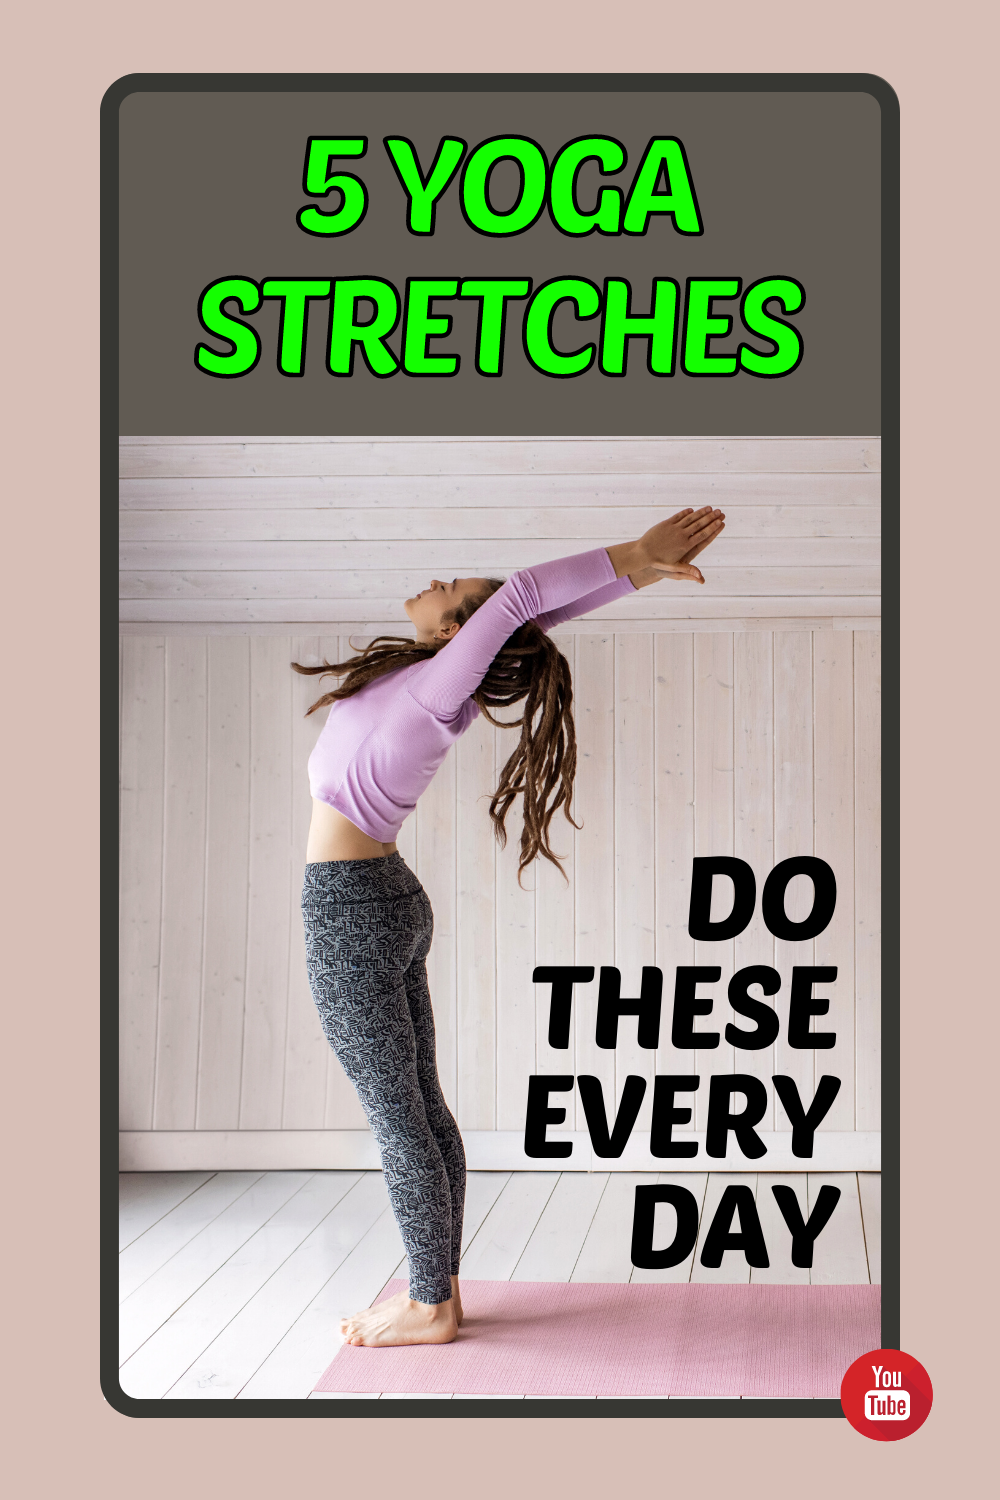 Try these 5 stretches EVERY DAY!